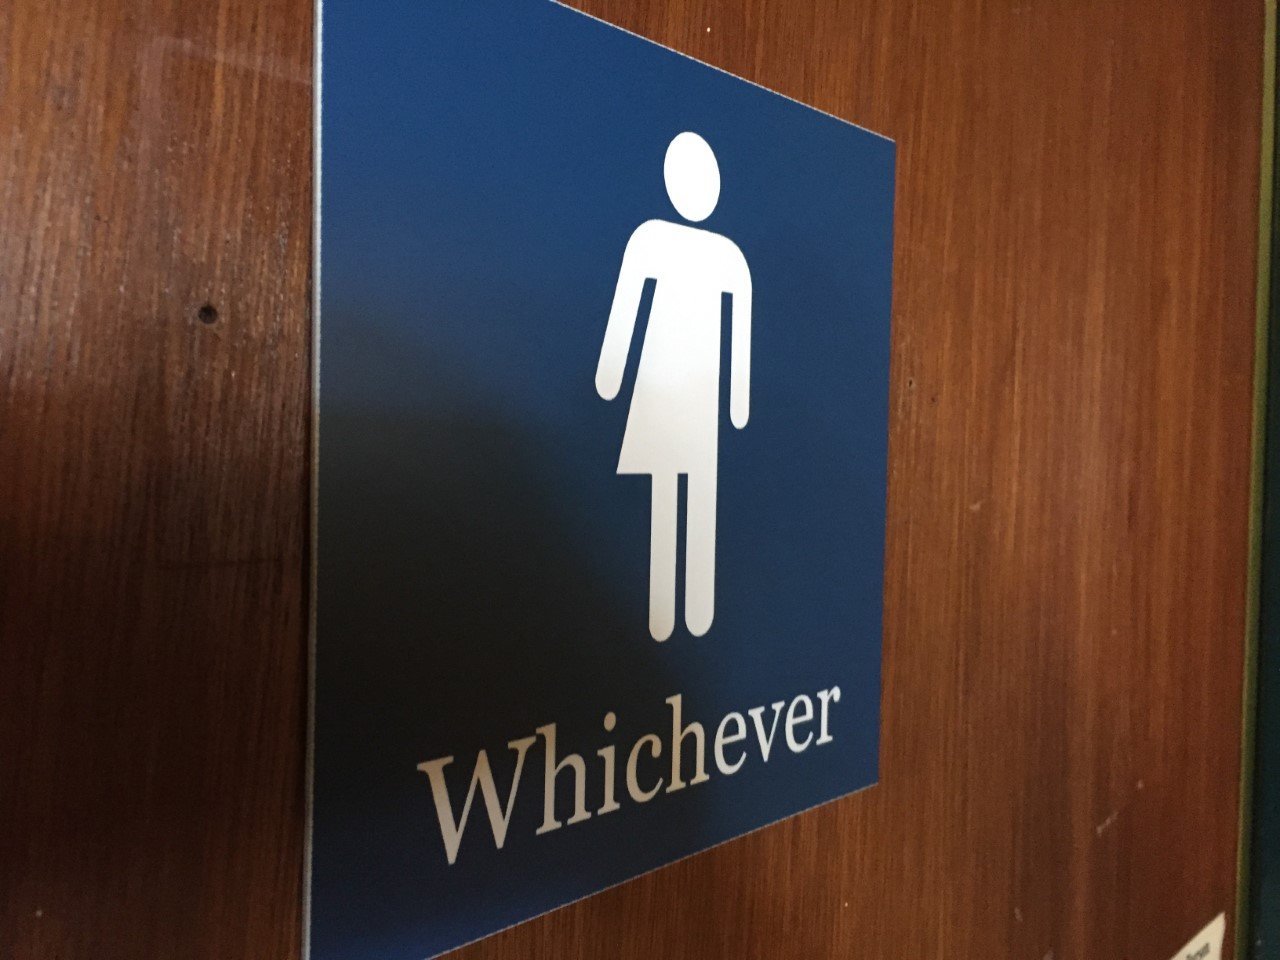 Virginia school district passes controversial policy forcing teachers to use trans pronouns